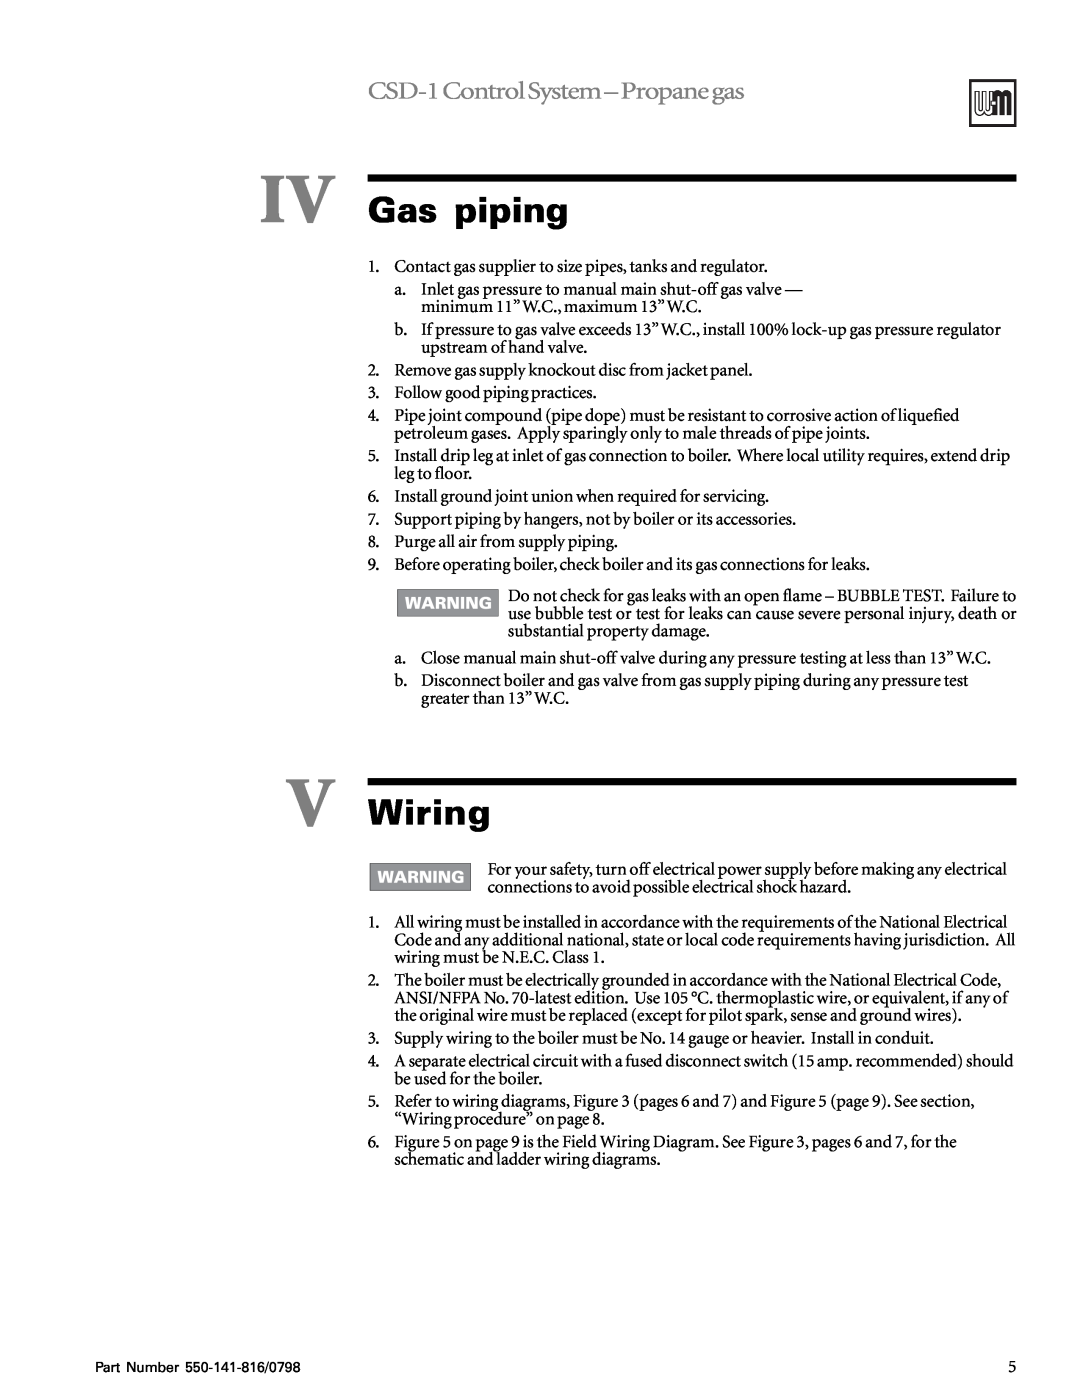 Weil-McLain 6-20 Series operating instructions IV Gas piping, V Wiring, CSD-1ControlSystem-Propanegas 